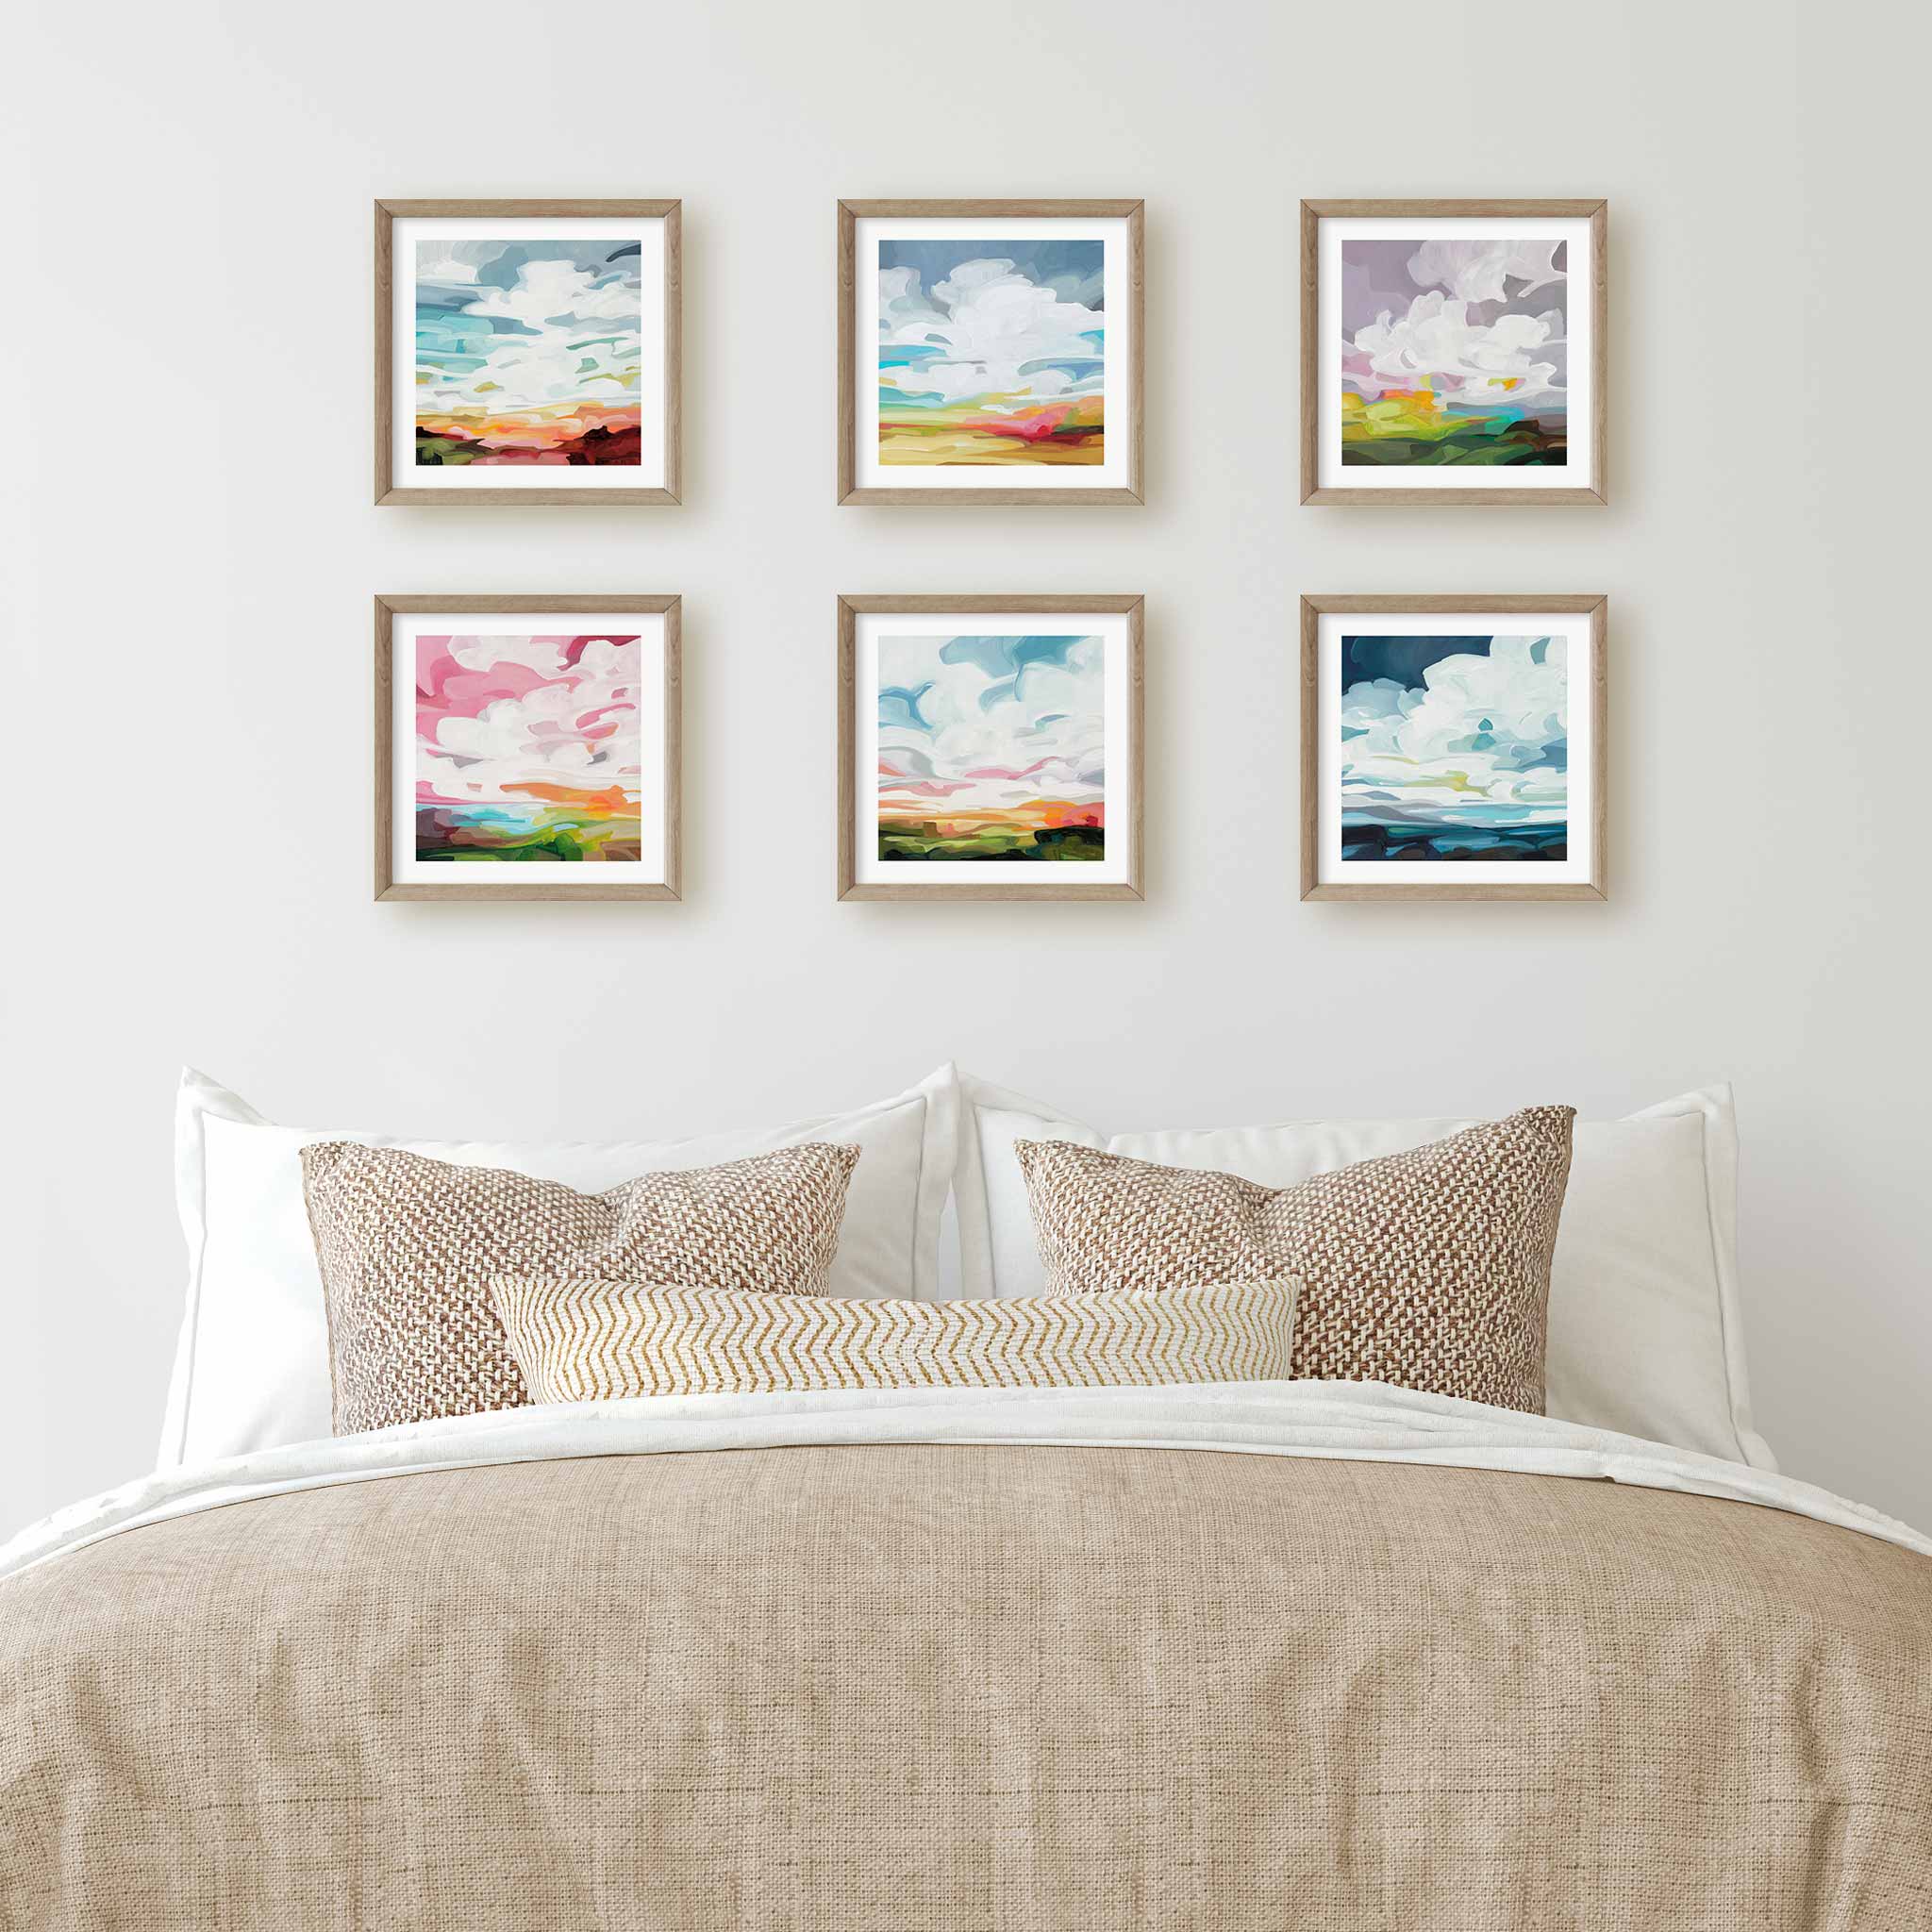 Canadian abstract artist Susannah Bleasby’s 12x12 art prints of blissful skies from the spring sky painting collection